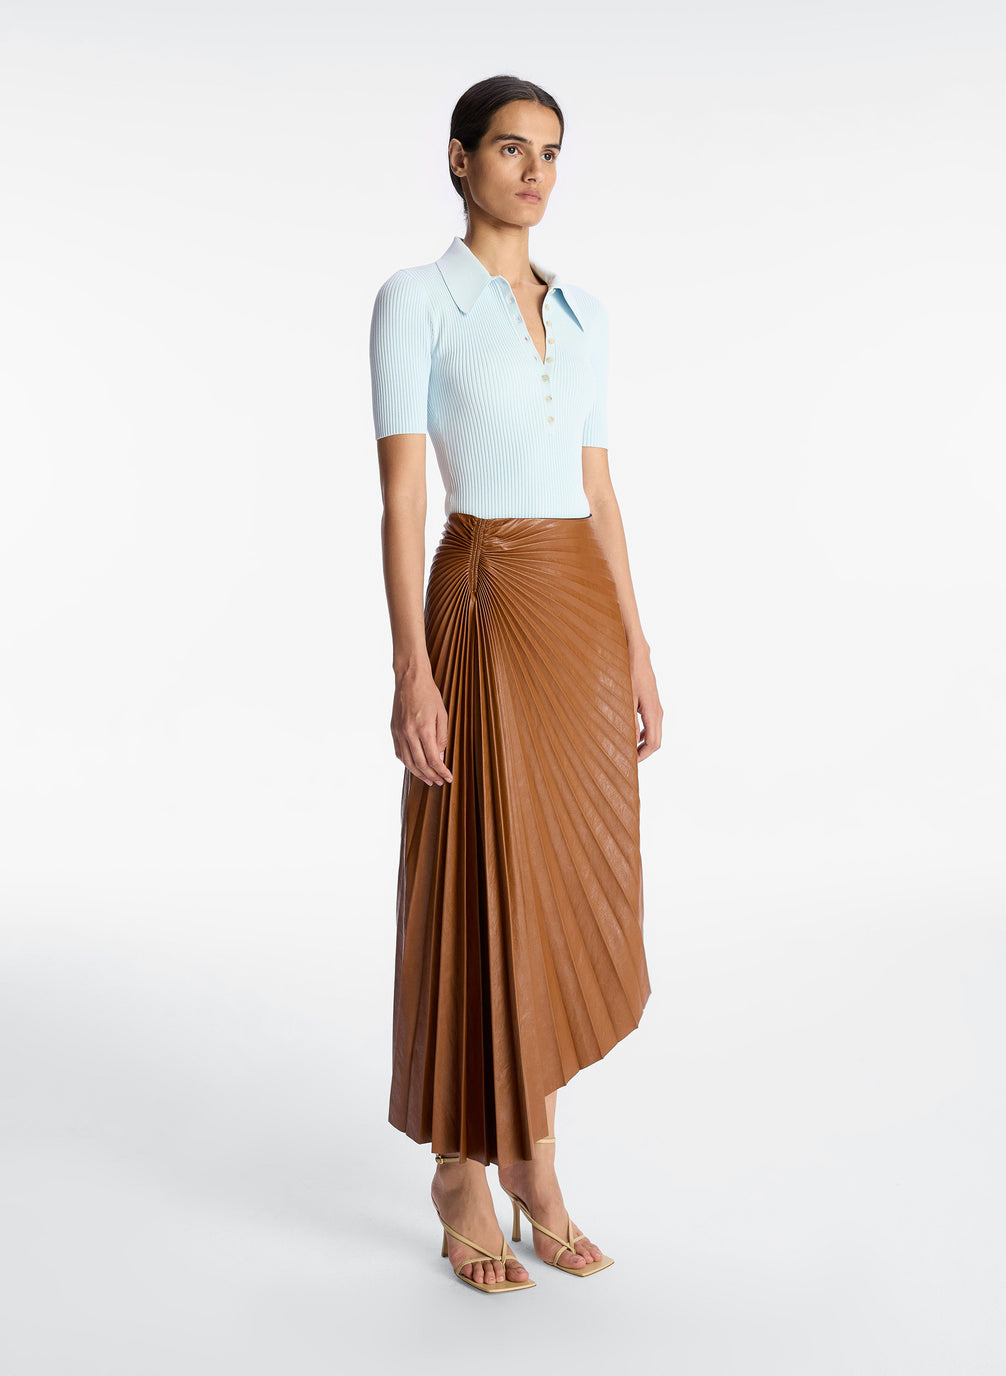 side view of a woman wearing light blue collared shirt with brown pleated vegan leather midi skirt